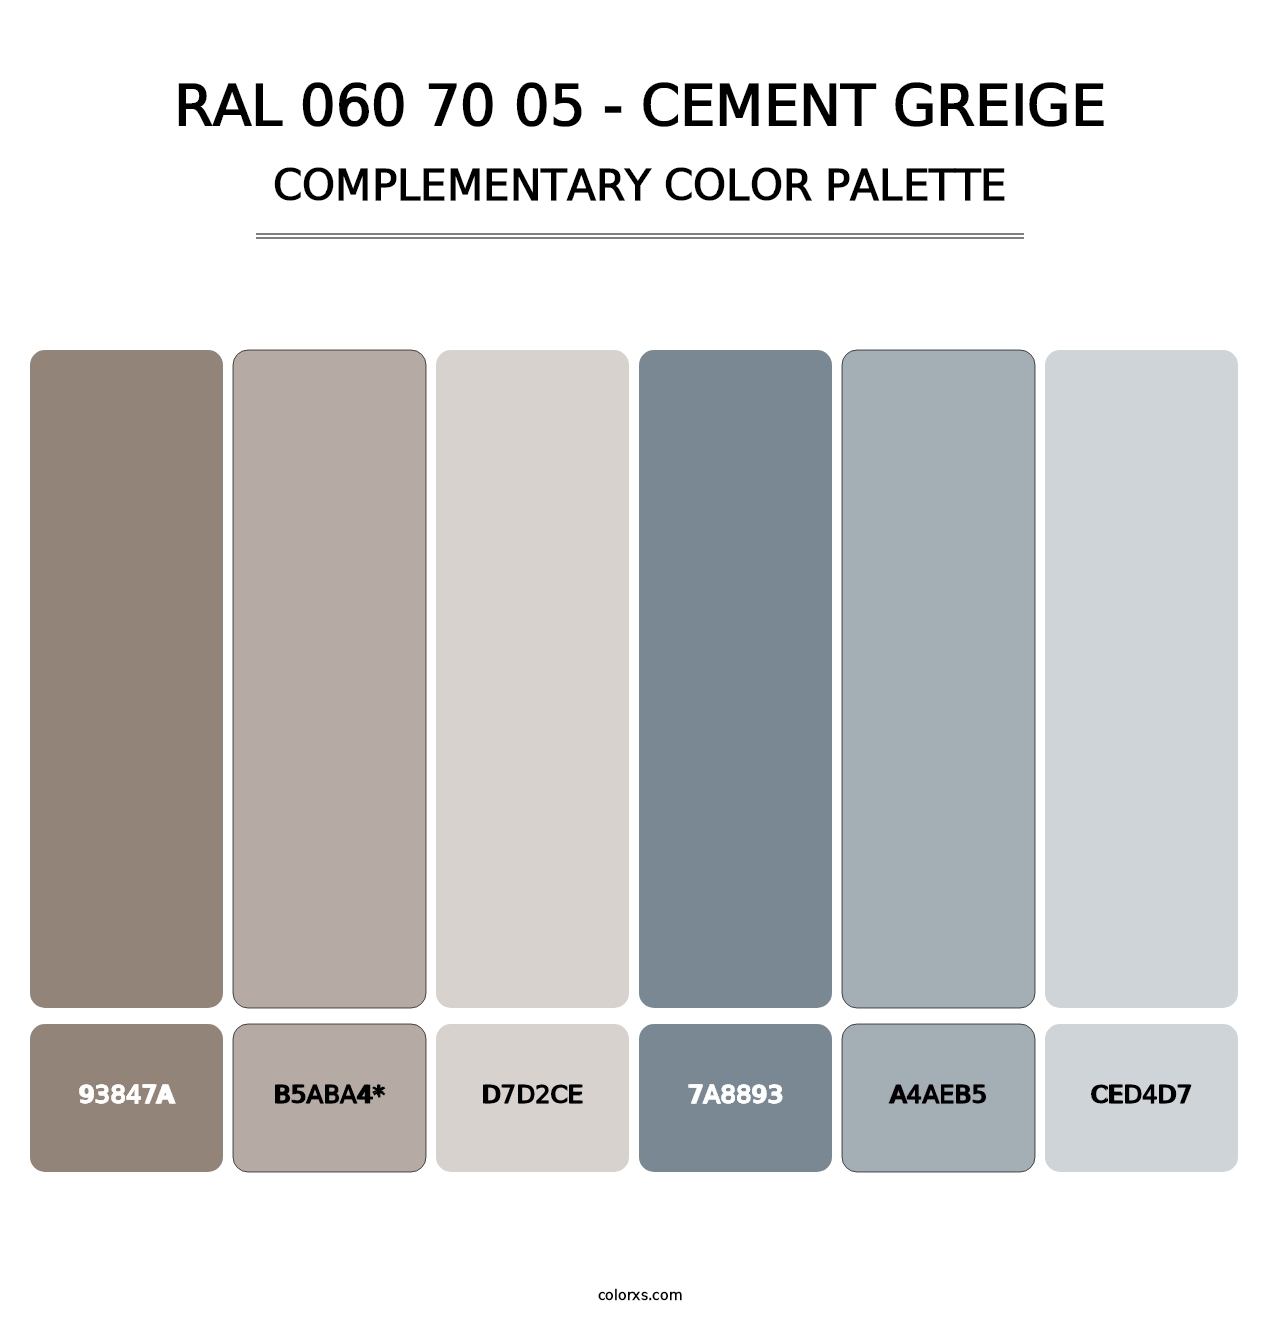 RAL 060 70 05 - Cement Greige - Complementary Color Palette